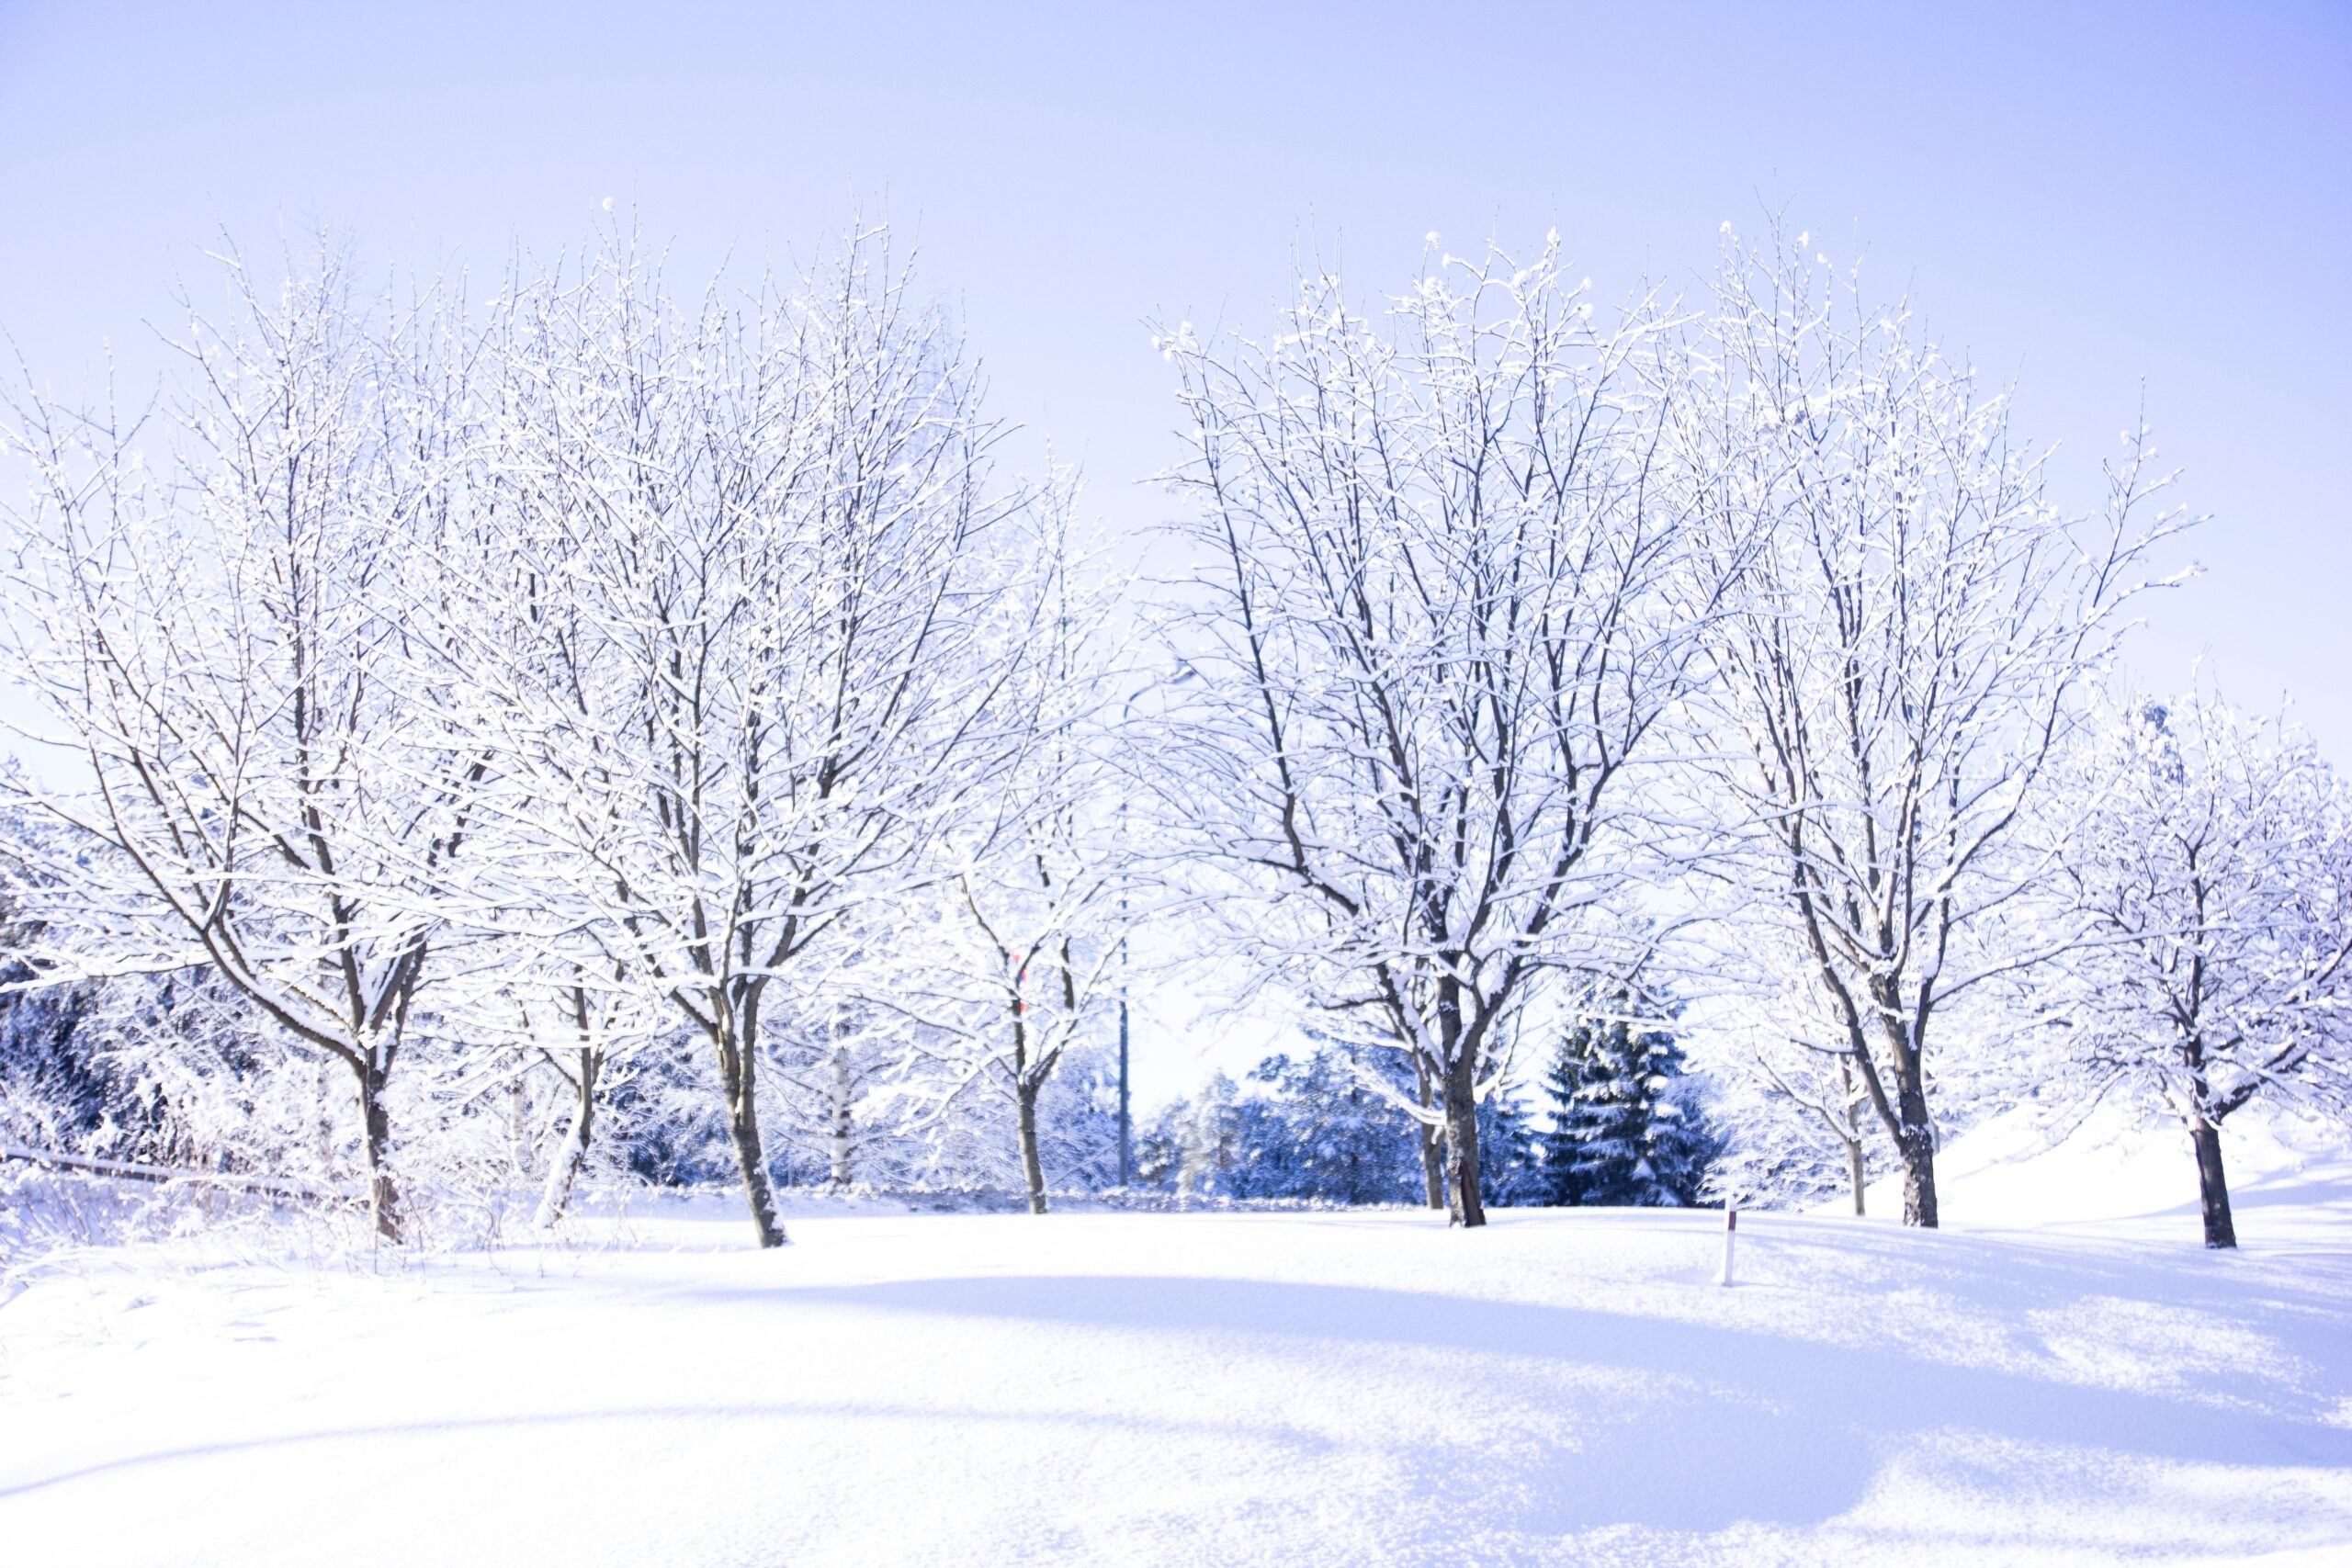 Snowy, bare trees standing in a row on a snowy hill